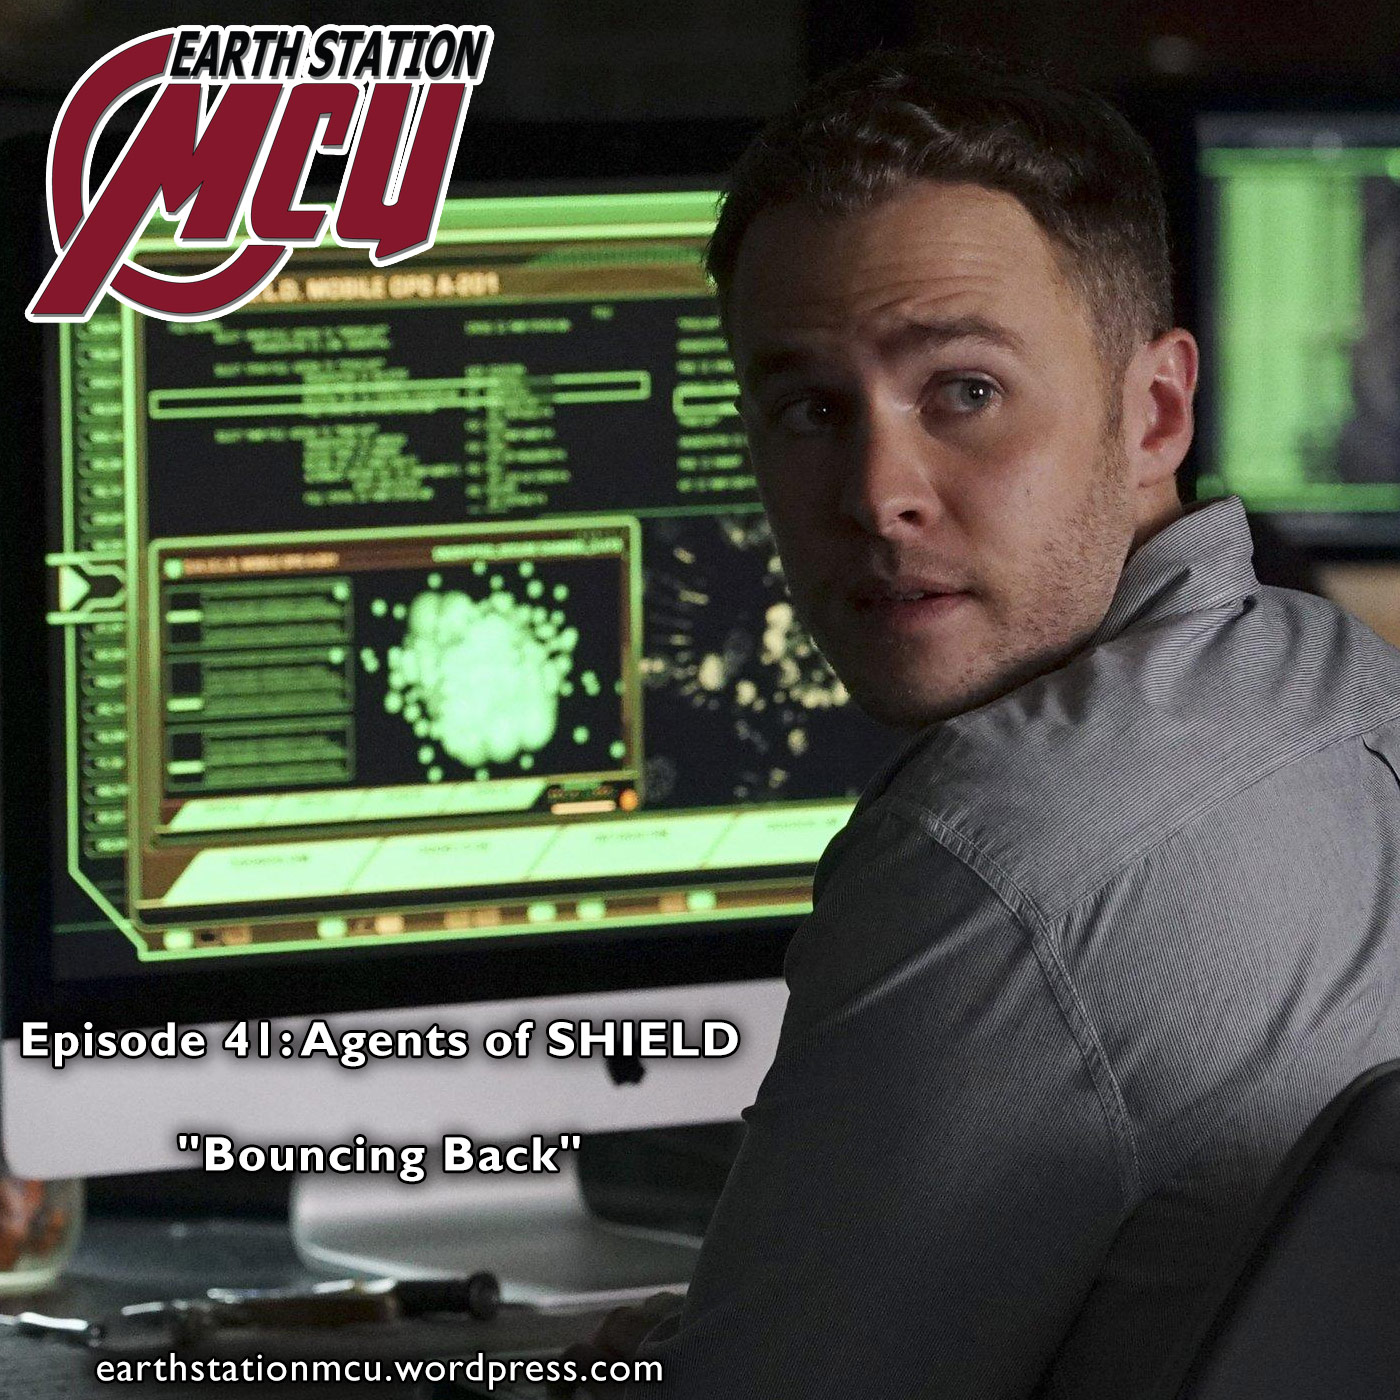 Earth Station MCU: Episode 41 - Agents of SHIELD ”Bouncing Back”